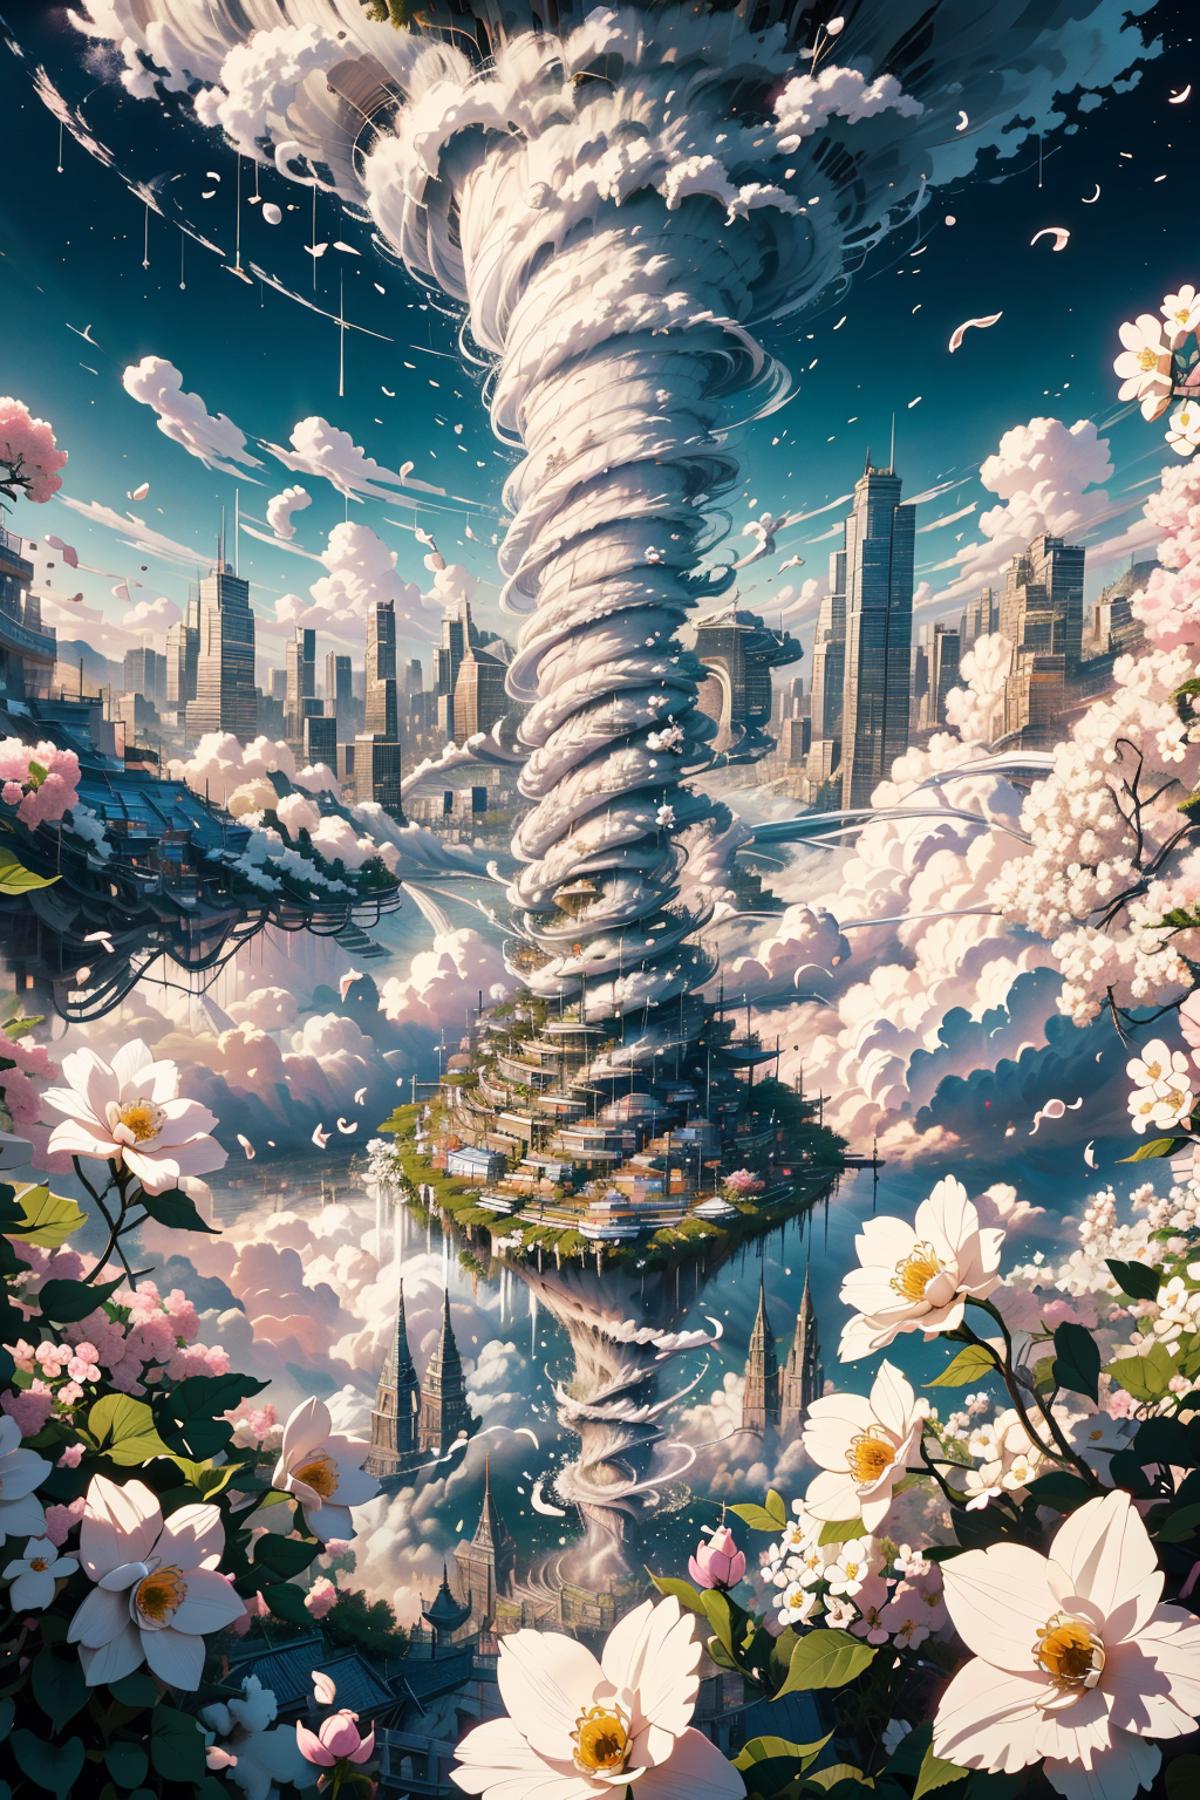 A surreal artwork of a big twisting tornado with a city on its side and a flower-filled sky.